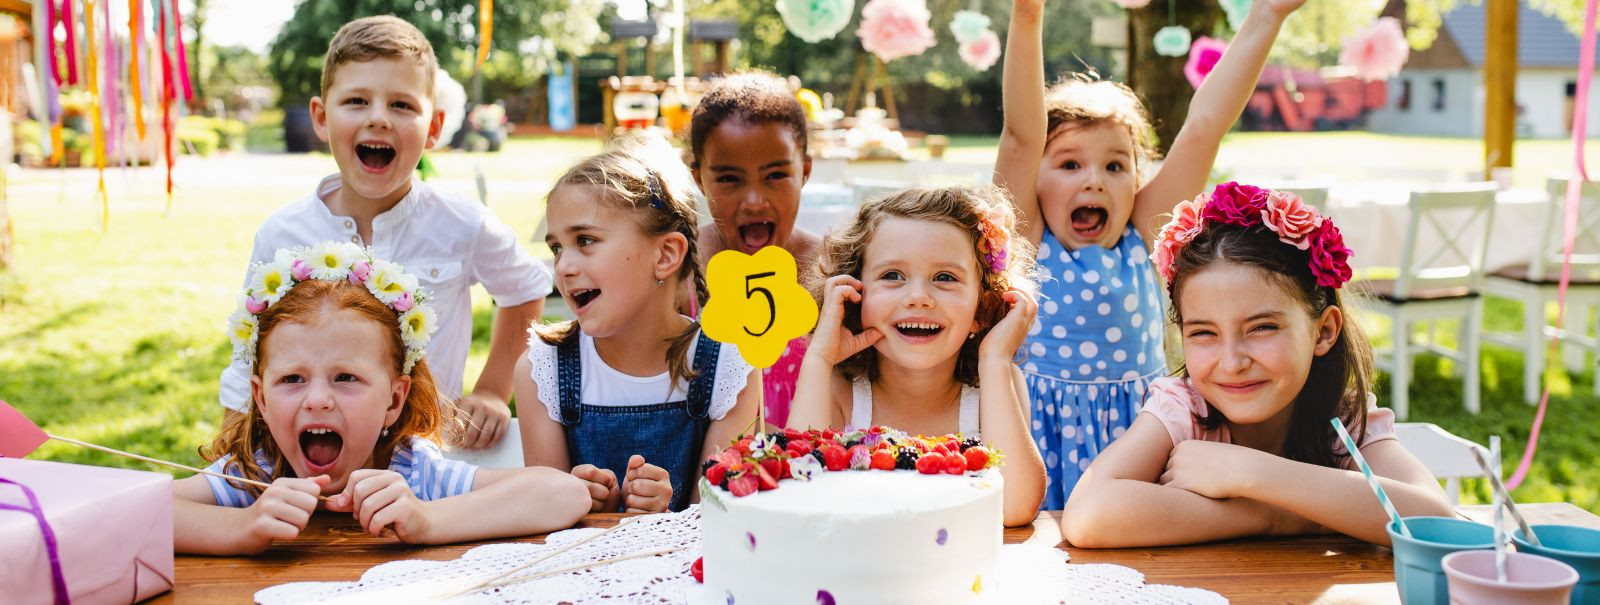 Planning a child's birthday party can be as fun as it is challenging. With the right approach, you can create a memorable event that celebrates your child and d